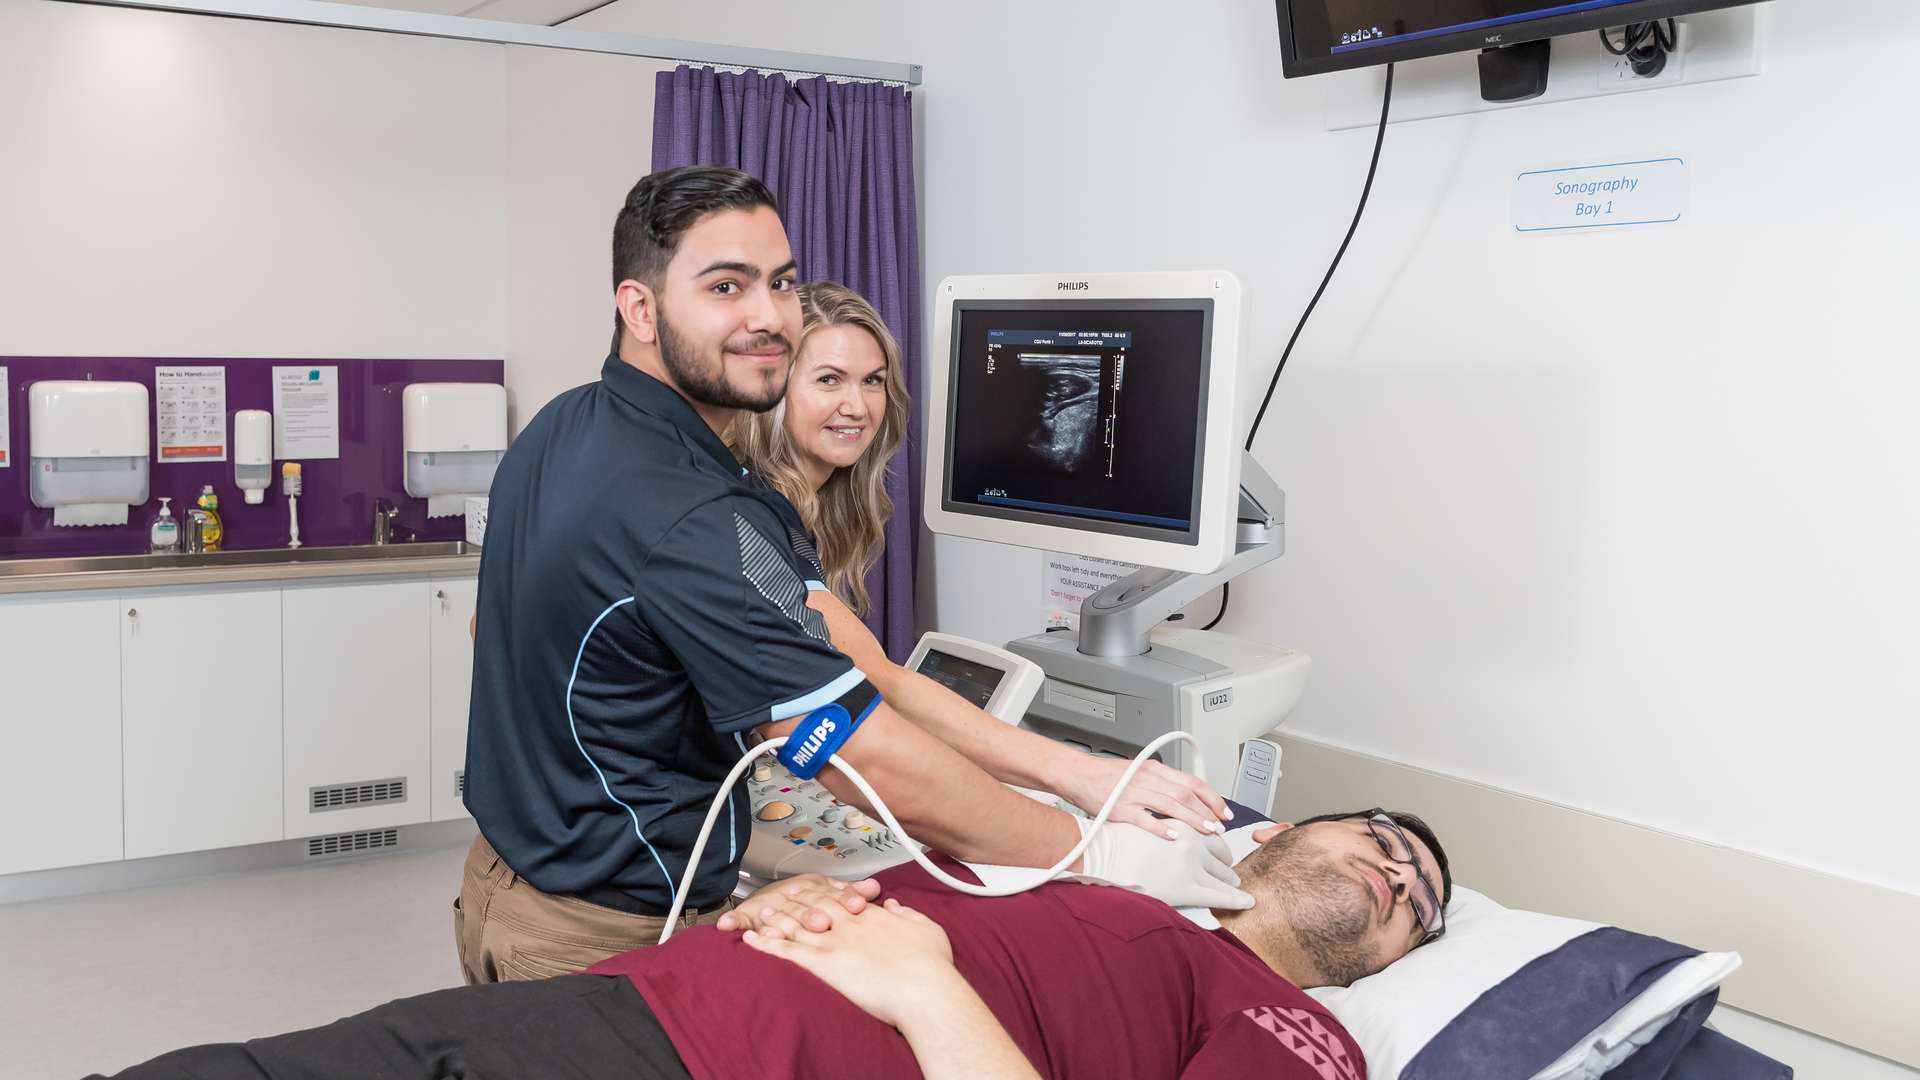 Students using a Sonography machine on a patient's neck